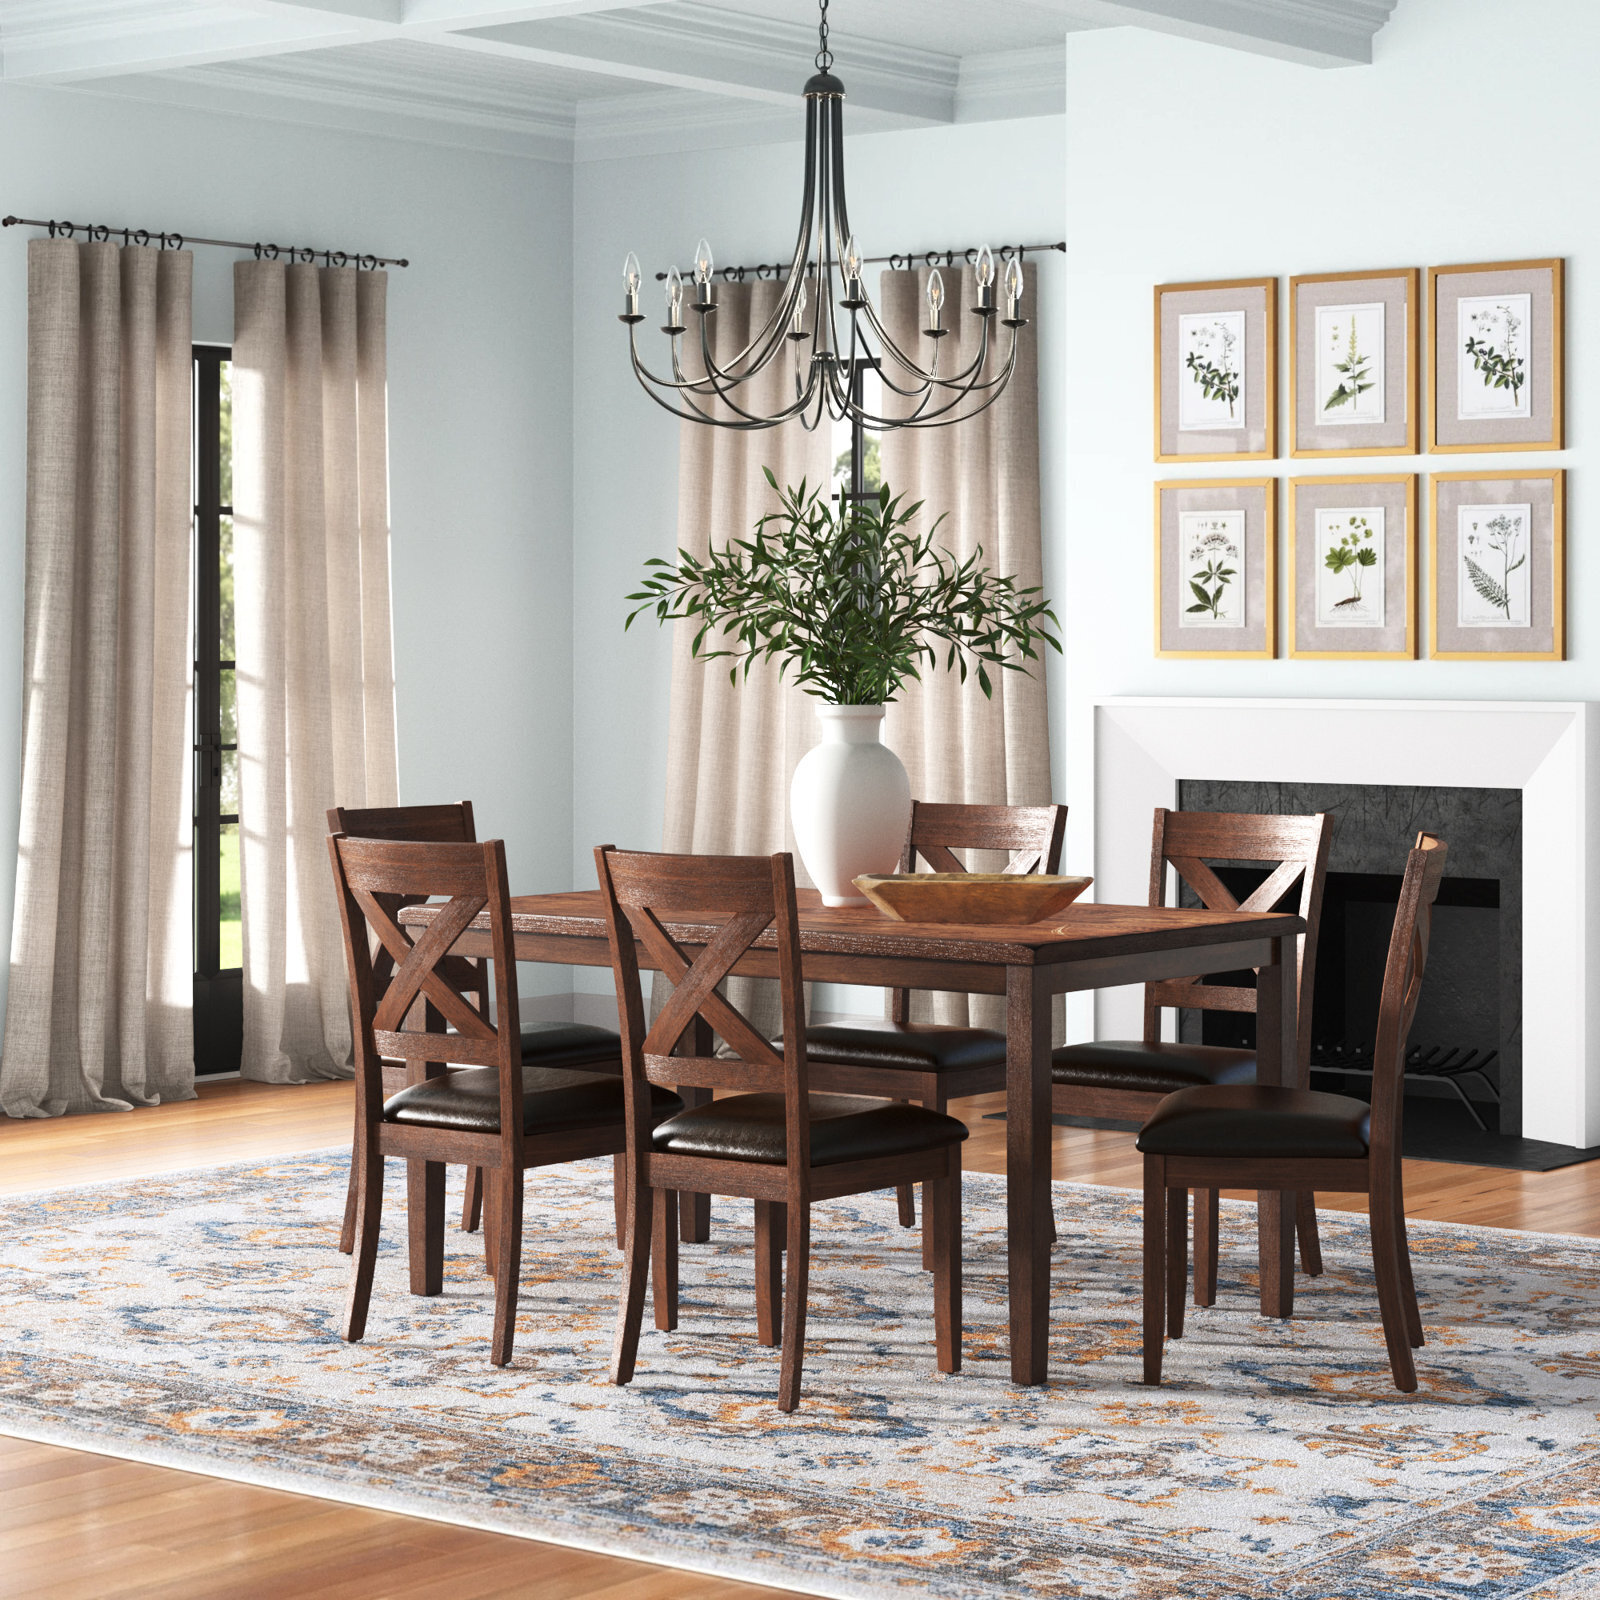 Craftsman style dining table and chairs